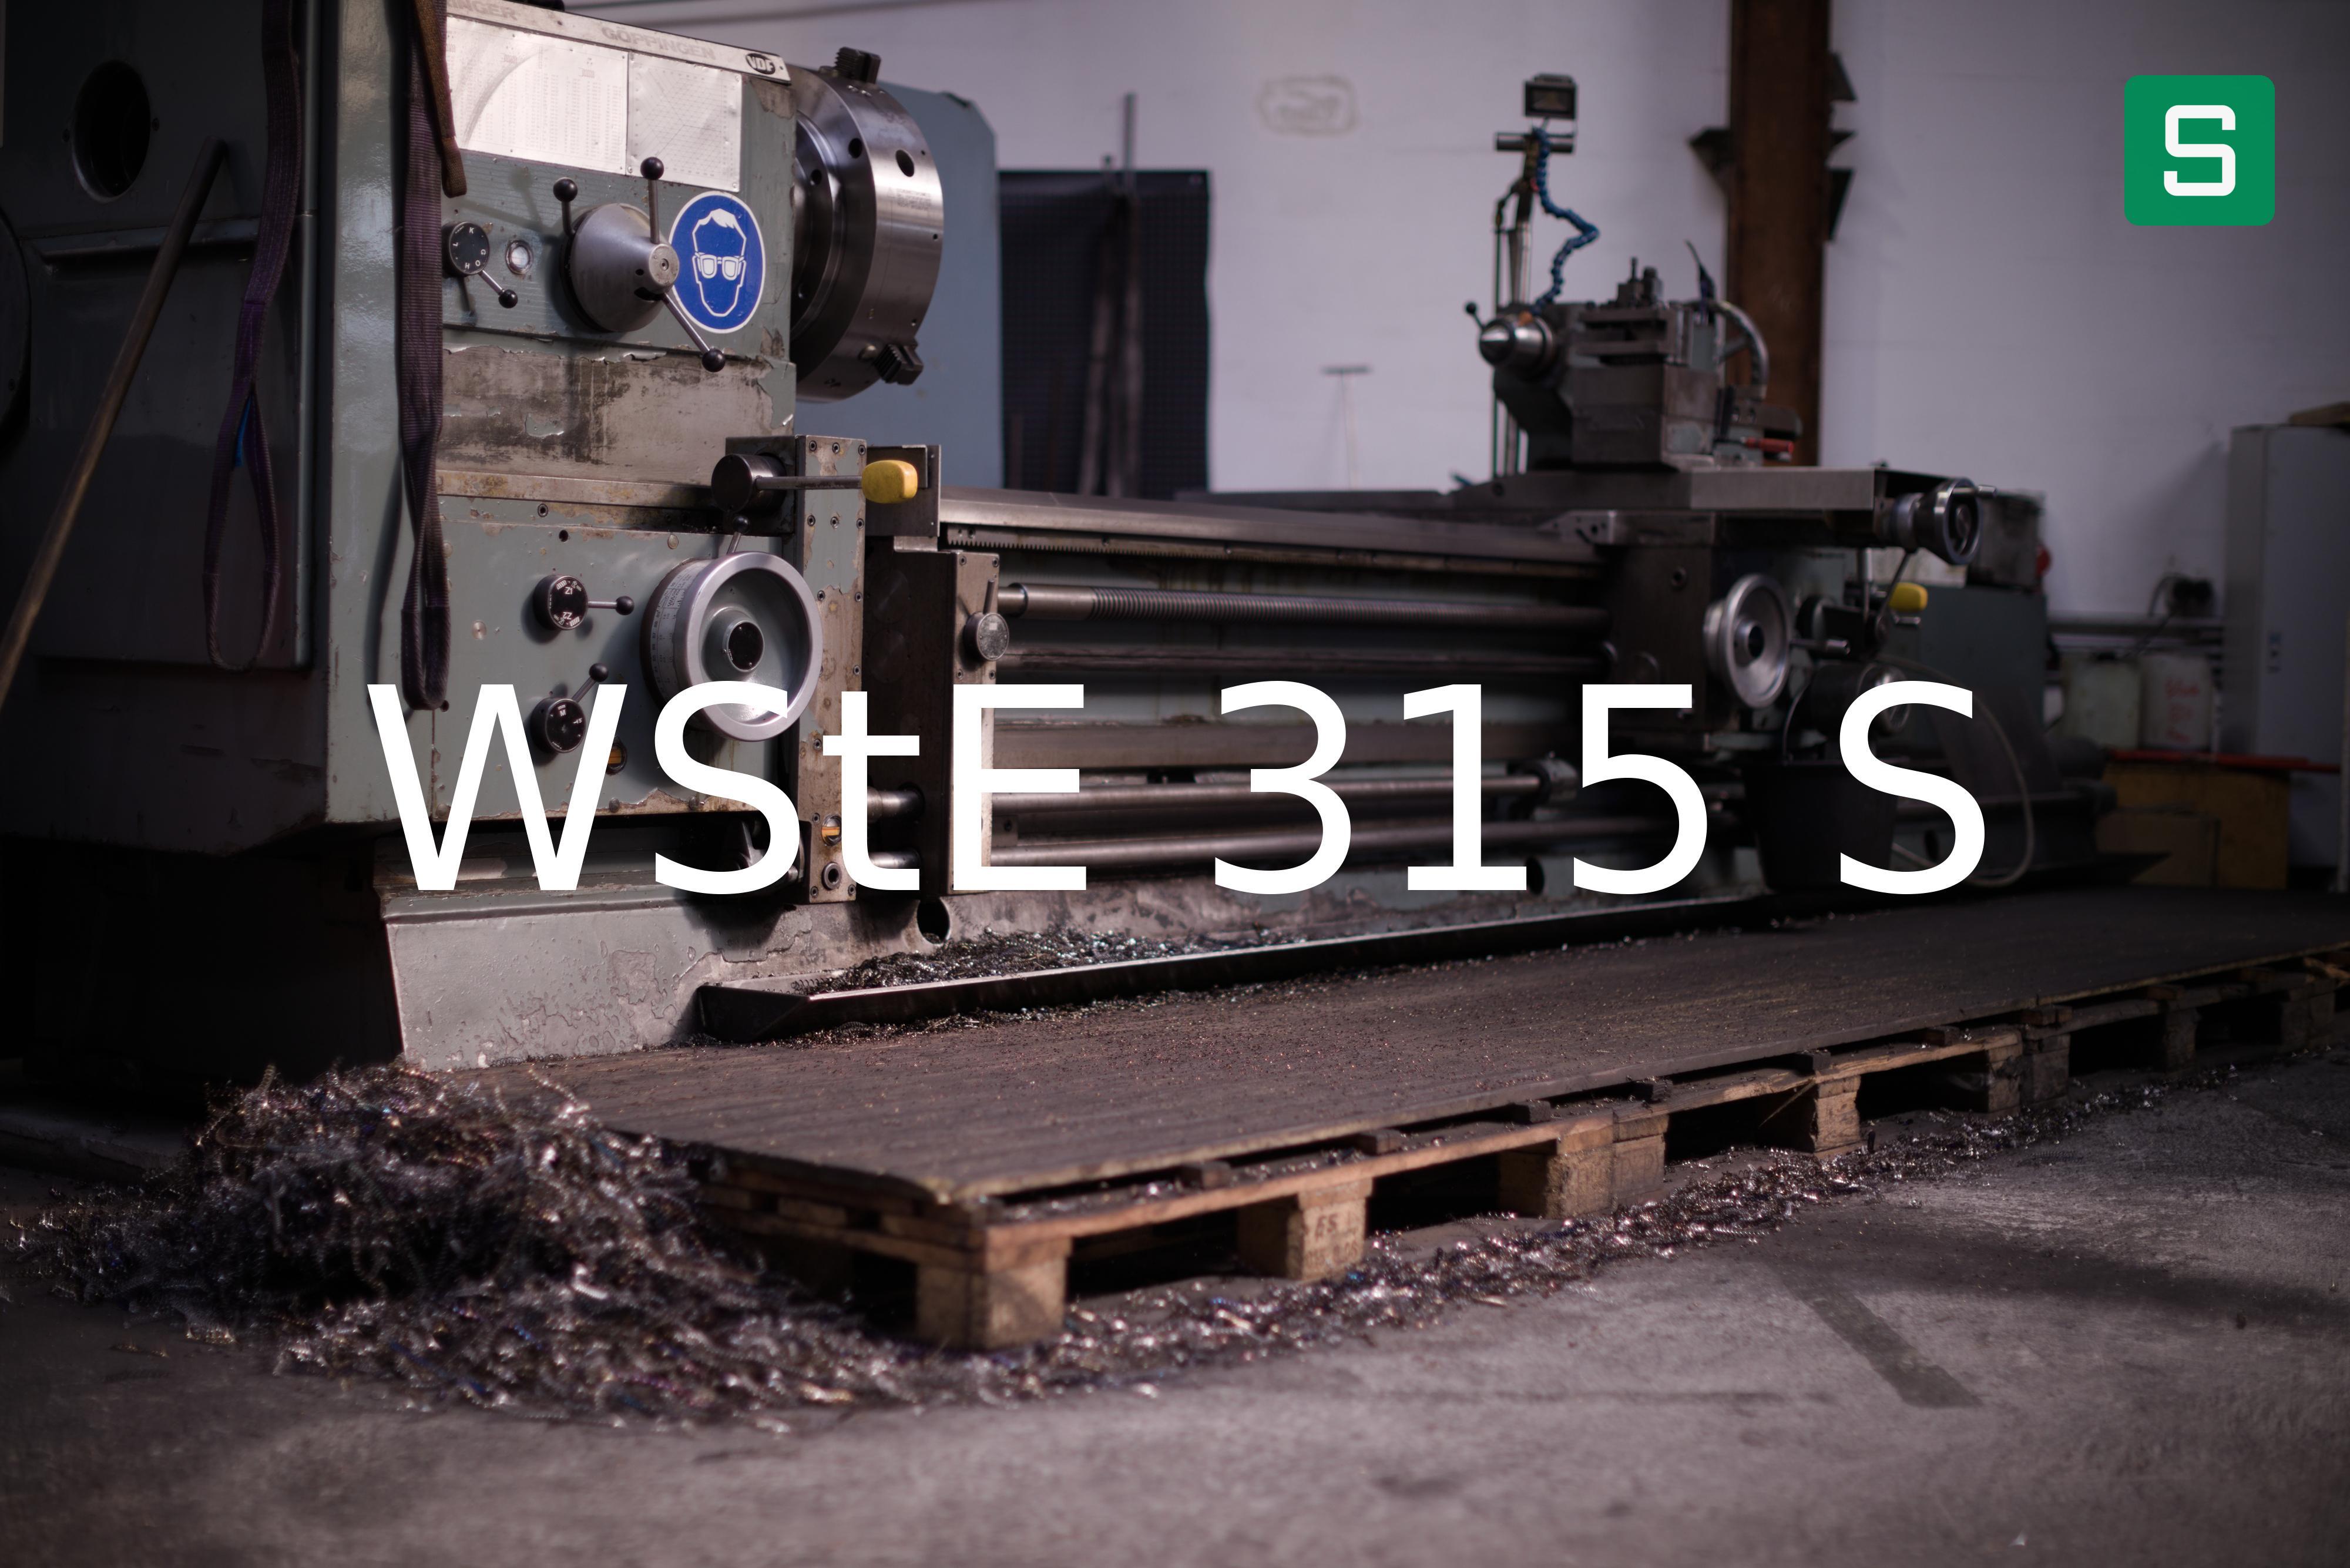 Steel Material: WStE 315 S